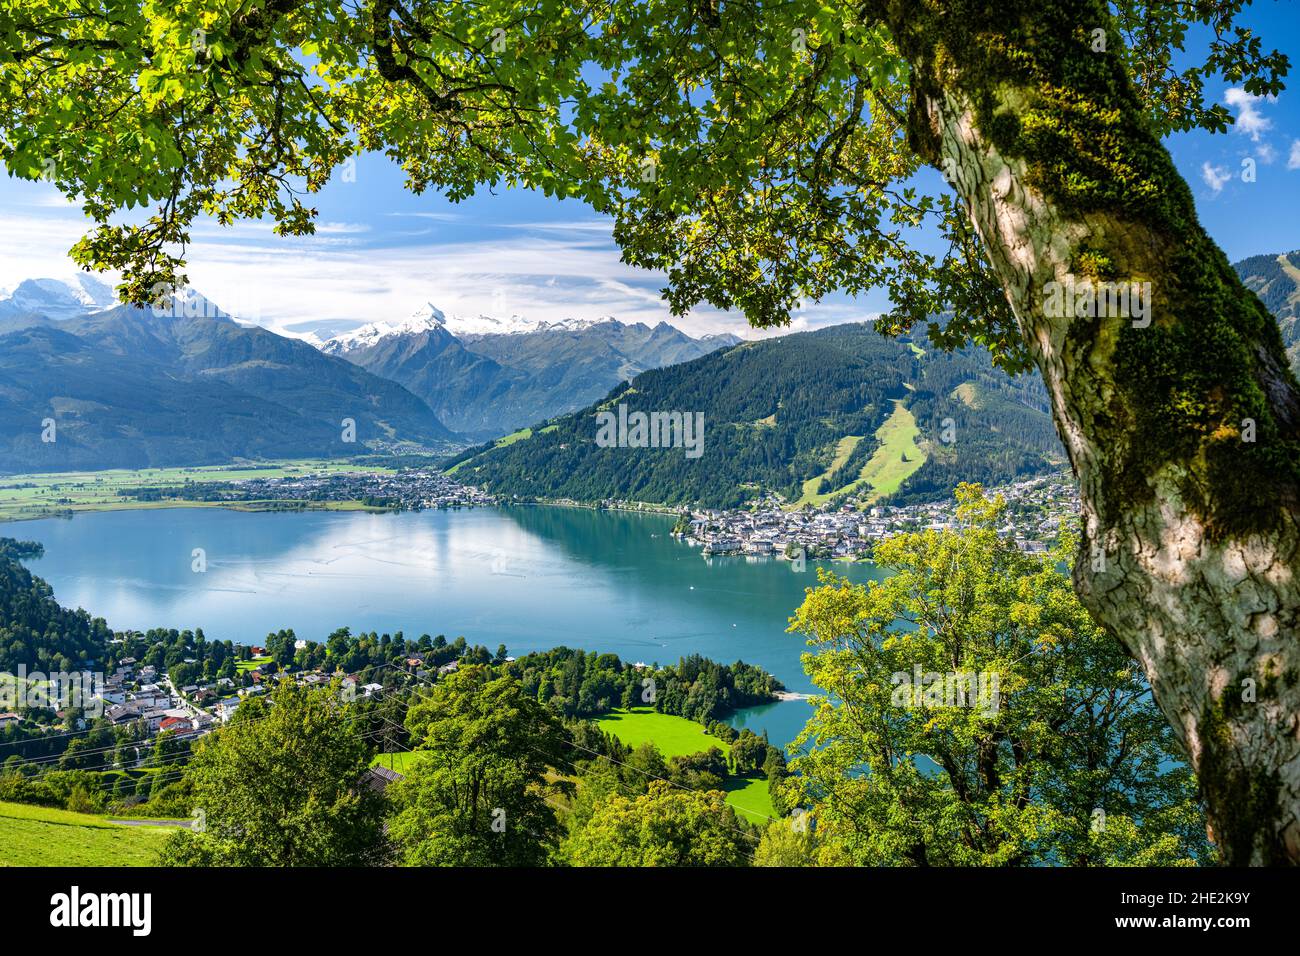 Fantastic view of the idyllic lake Zell am See in a summer alpine landscape in the Salzburger Land, Zell am See, Austria, Europe Stock Photo